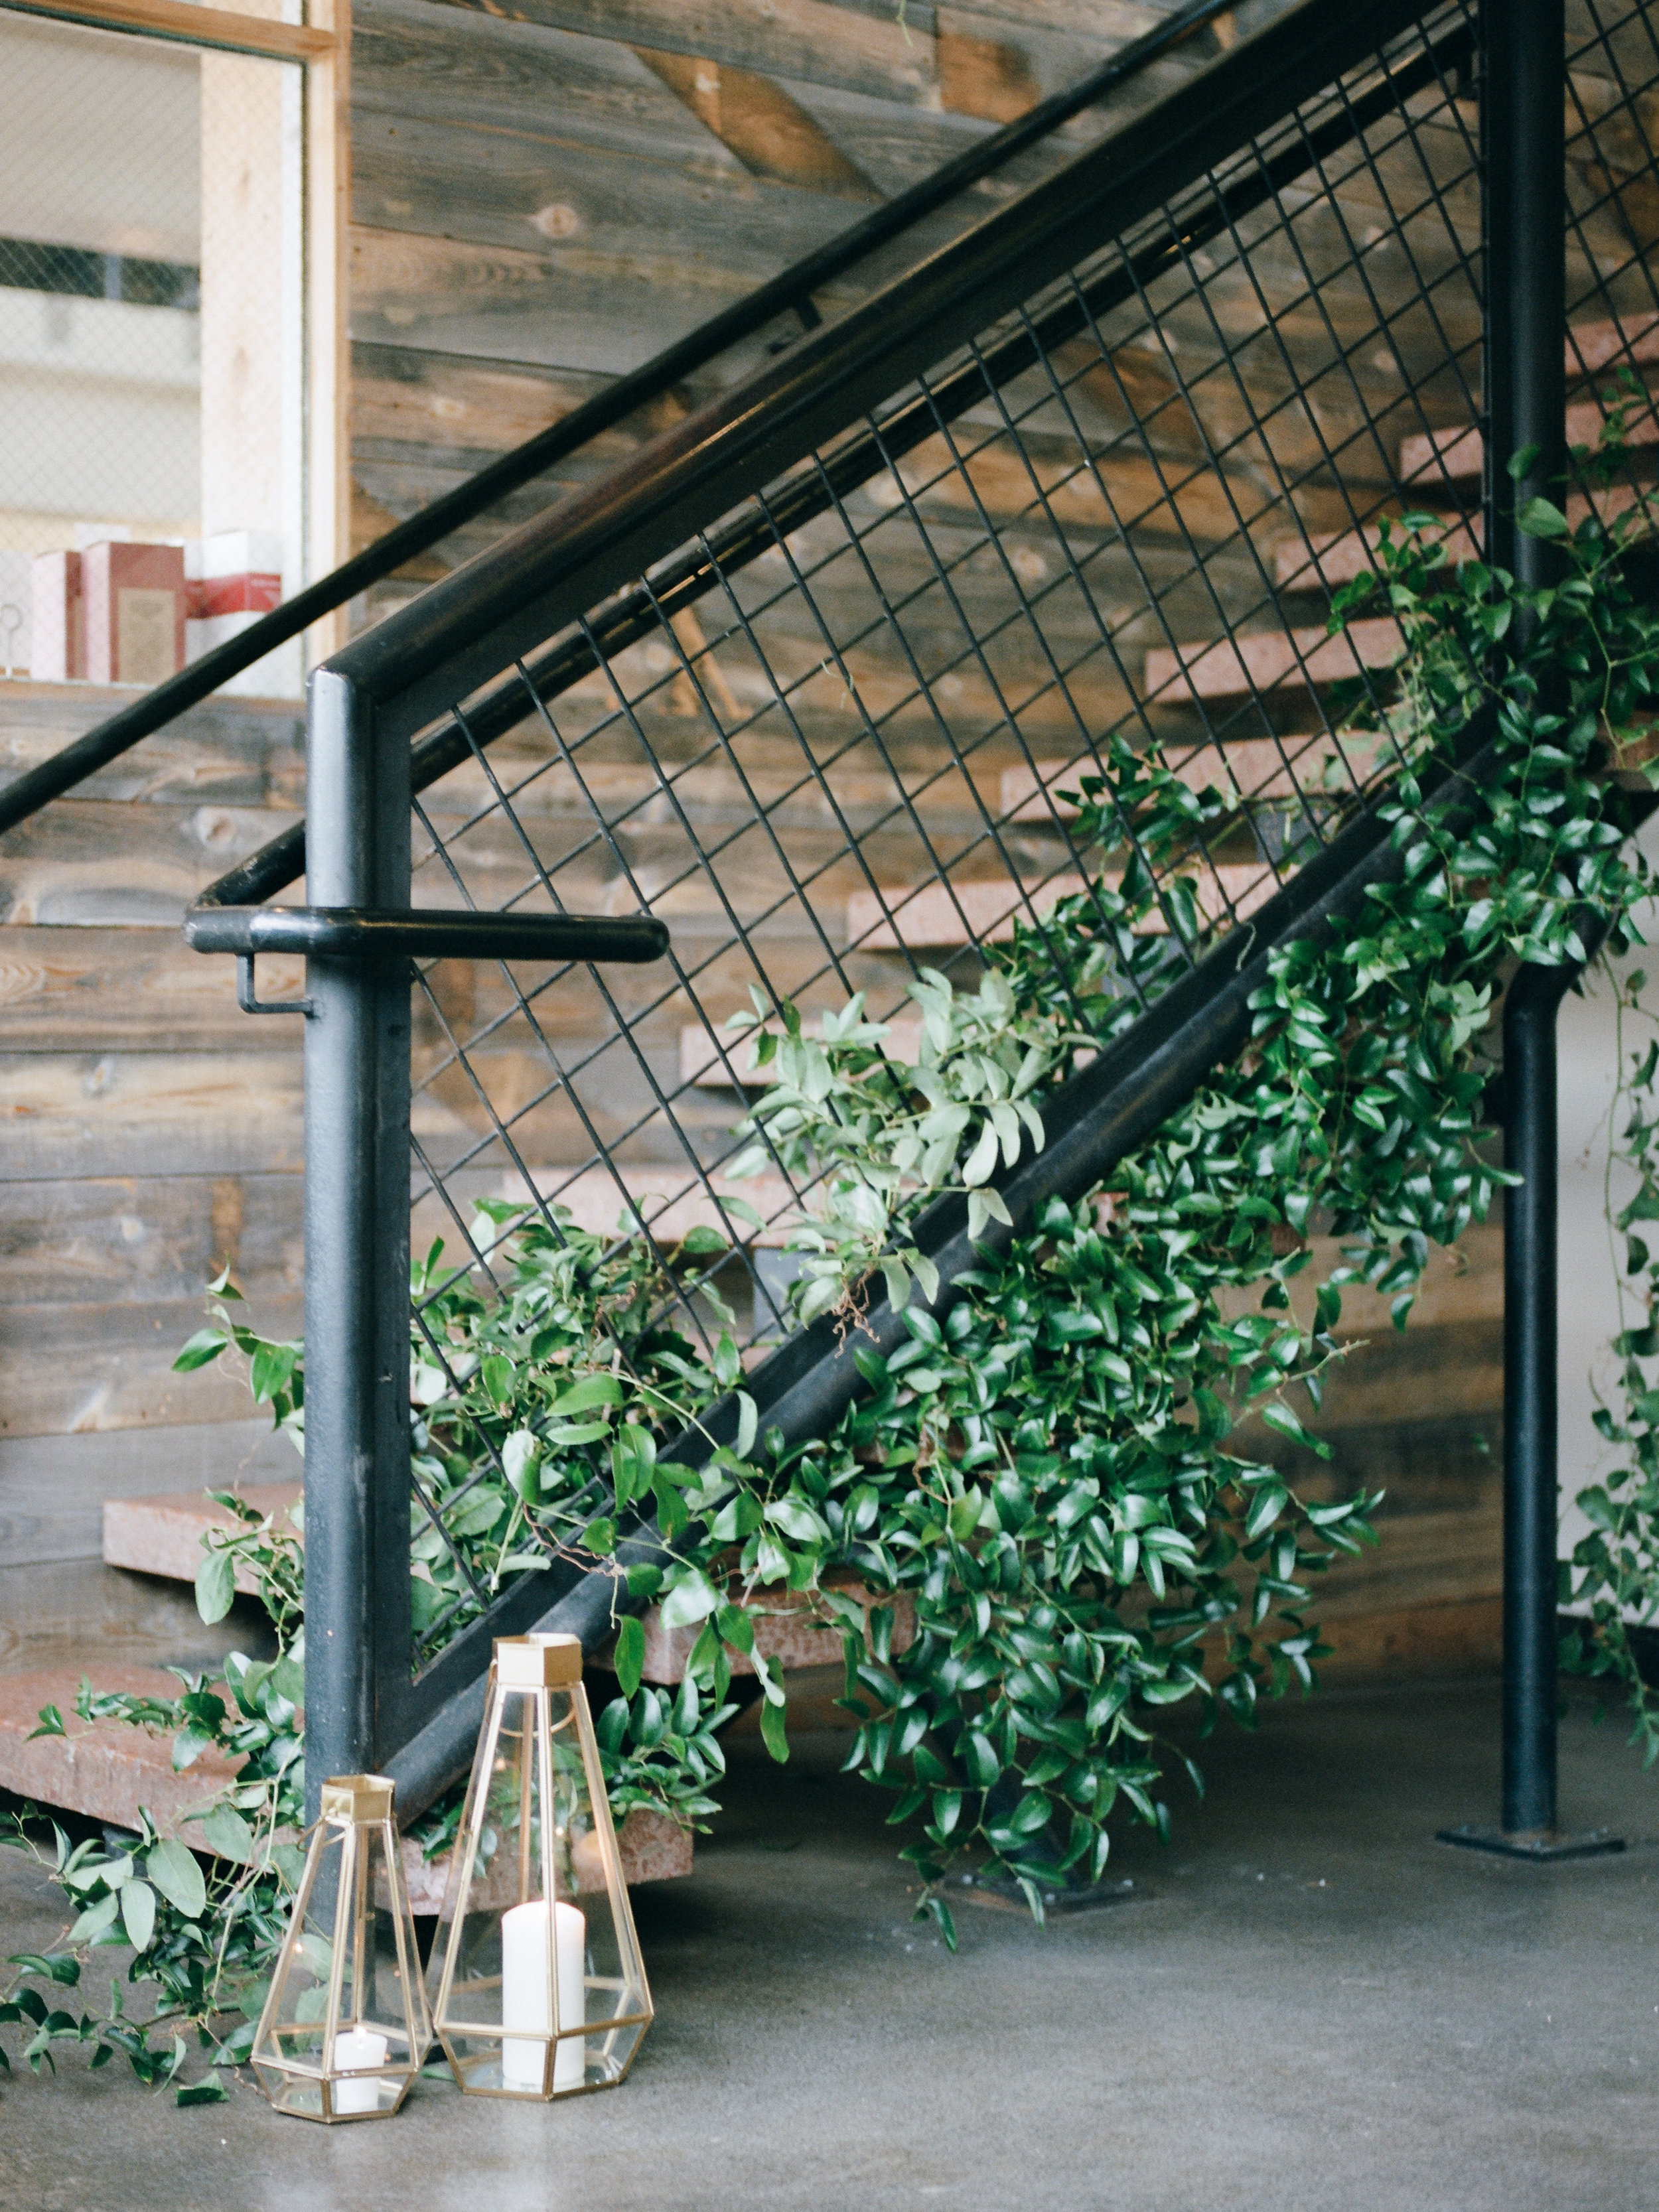 Ethereal Wedding at Publik Coffee | Blush and Blue Wedding | Michelle Leo Events | Utah Event Planner and Designer | Jessica Kettle Photography and Heather Nan Photography